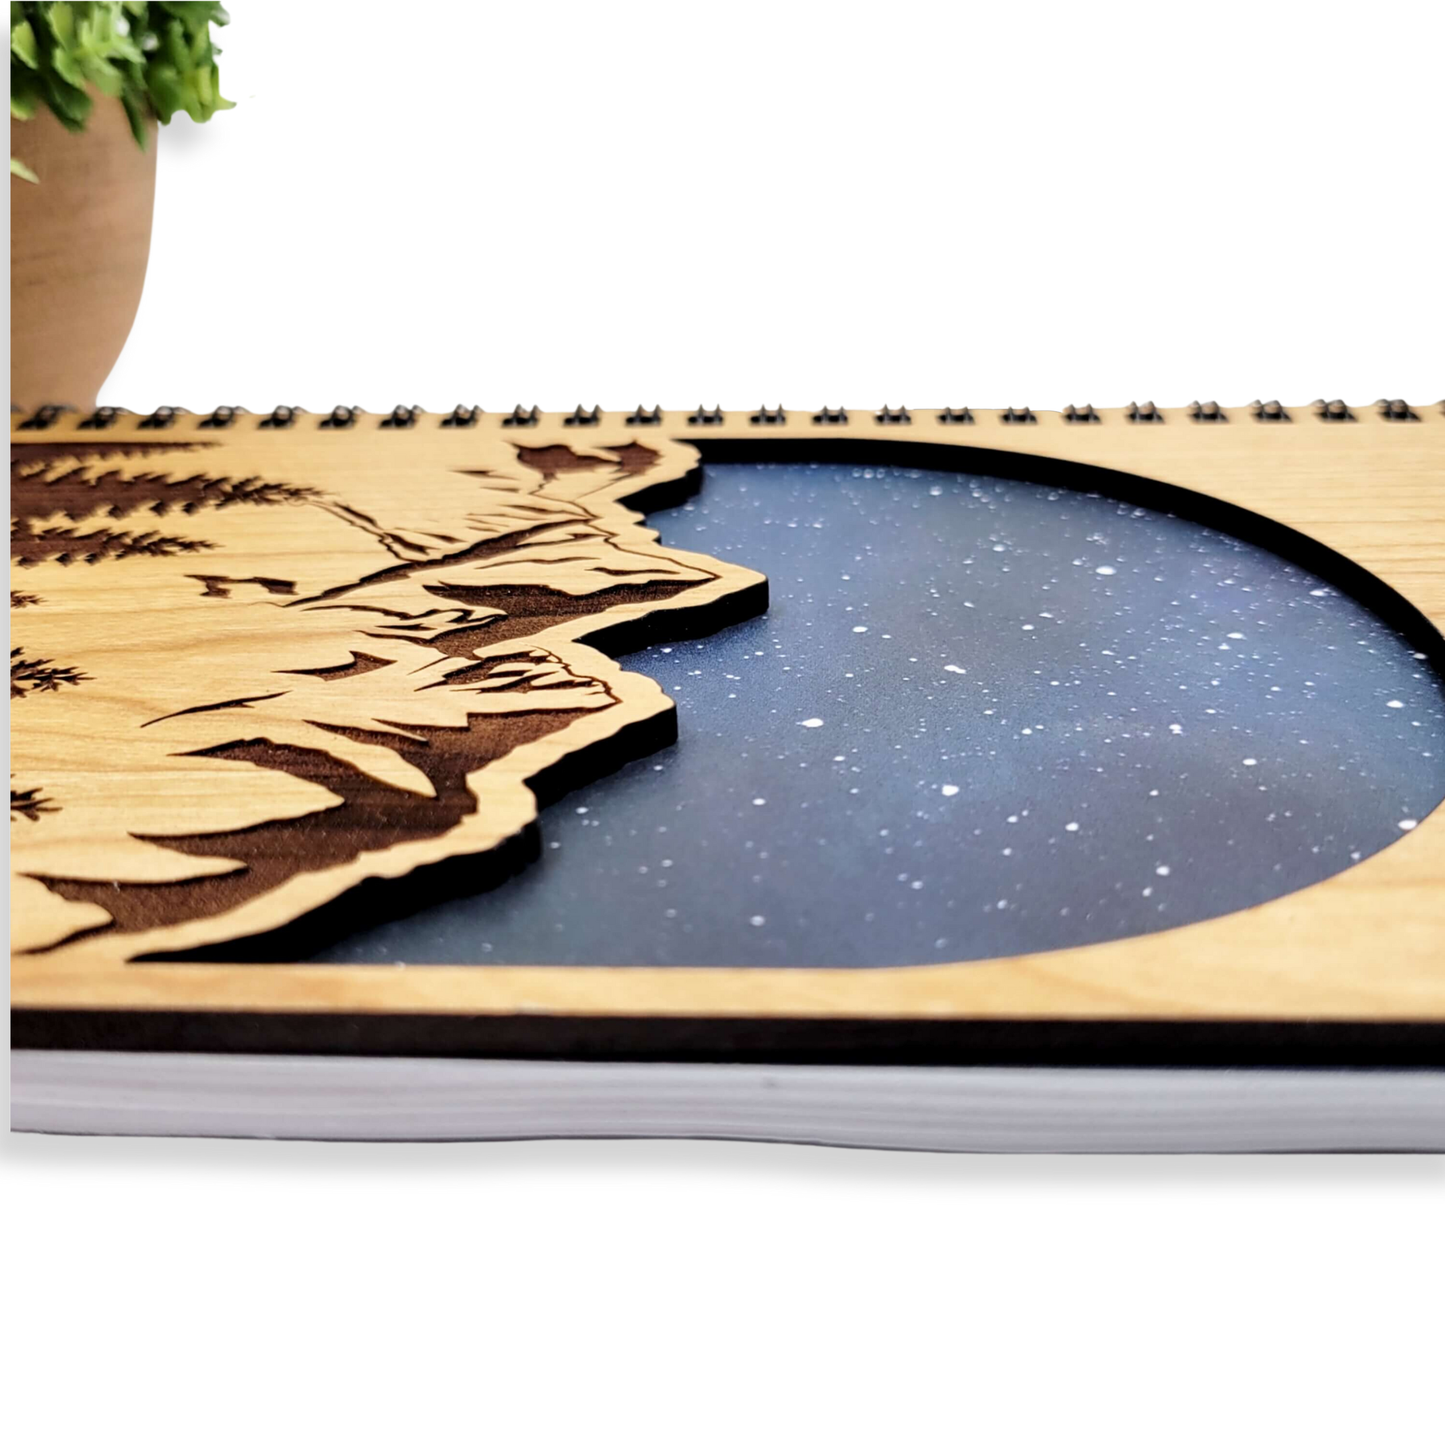 Starry mountains wood journal - stationery, journals: Blank